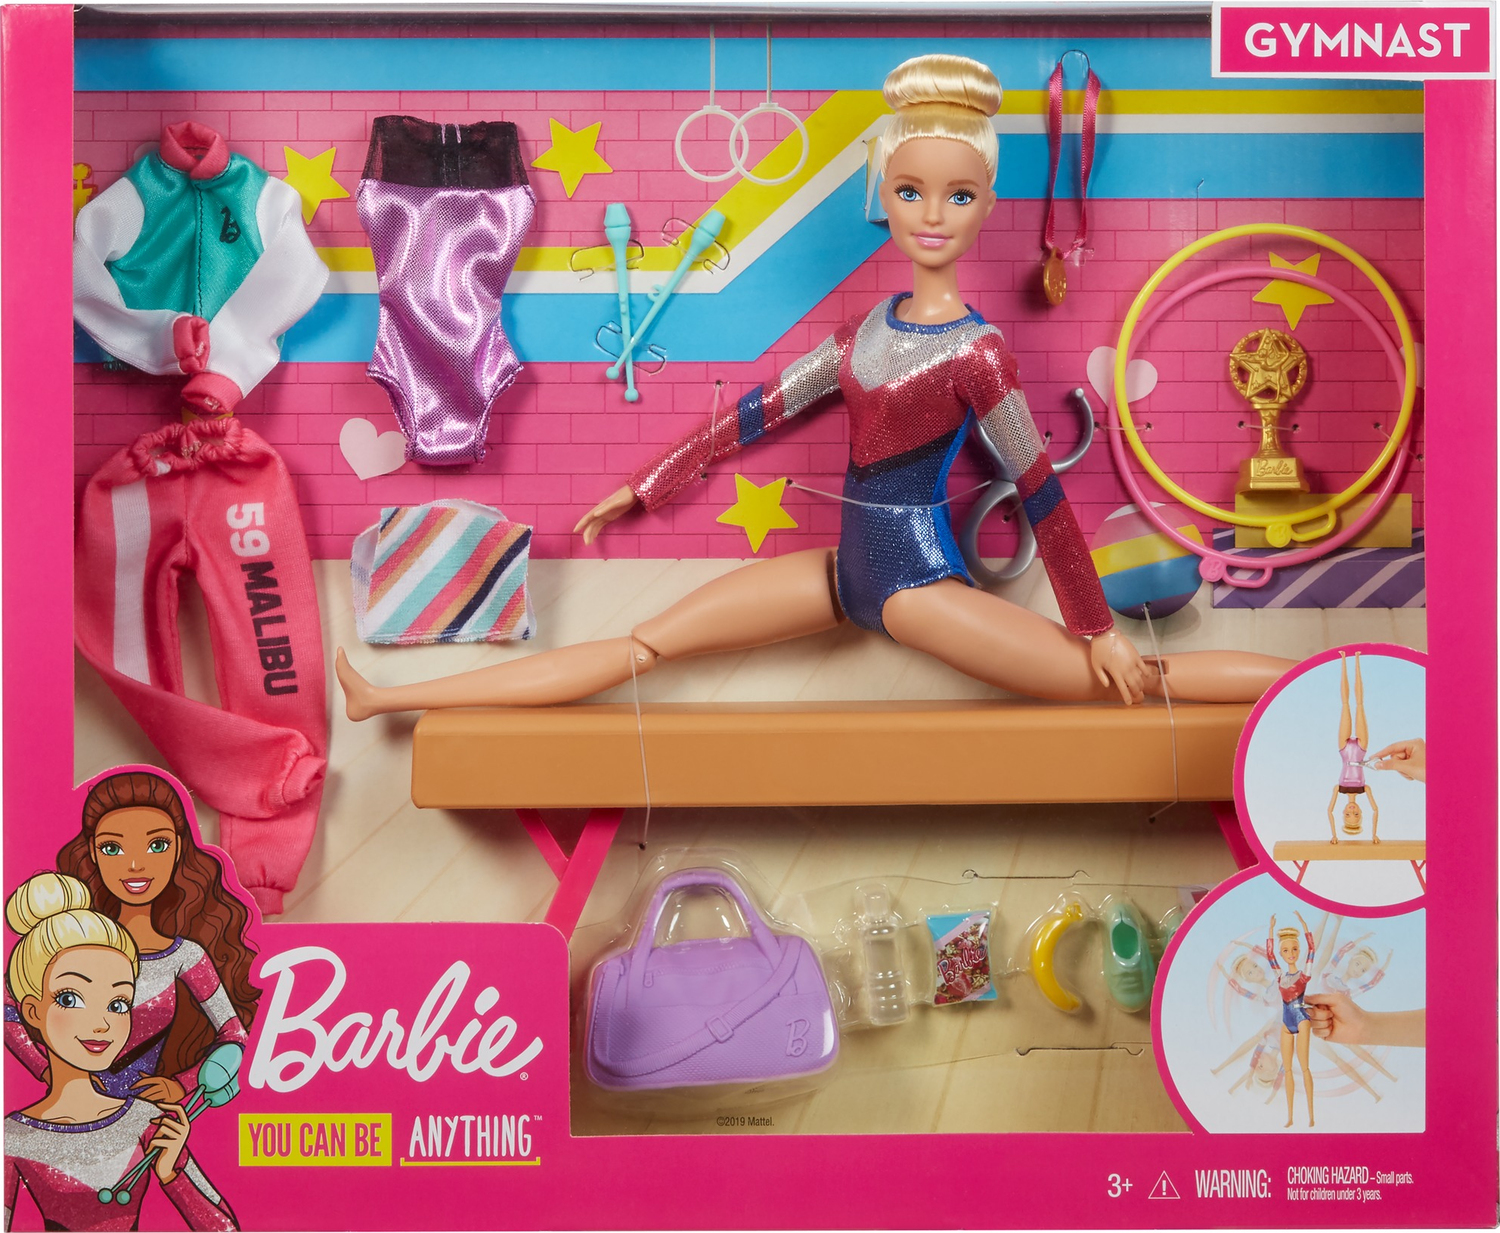 Barbie Gymnastics Doll And Playset - The Toy Box Hanover